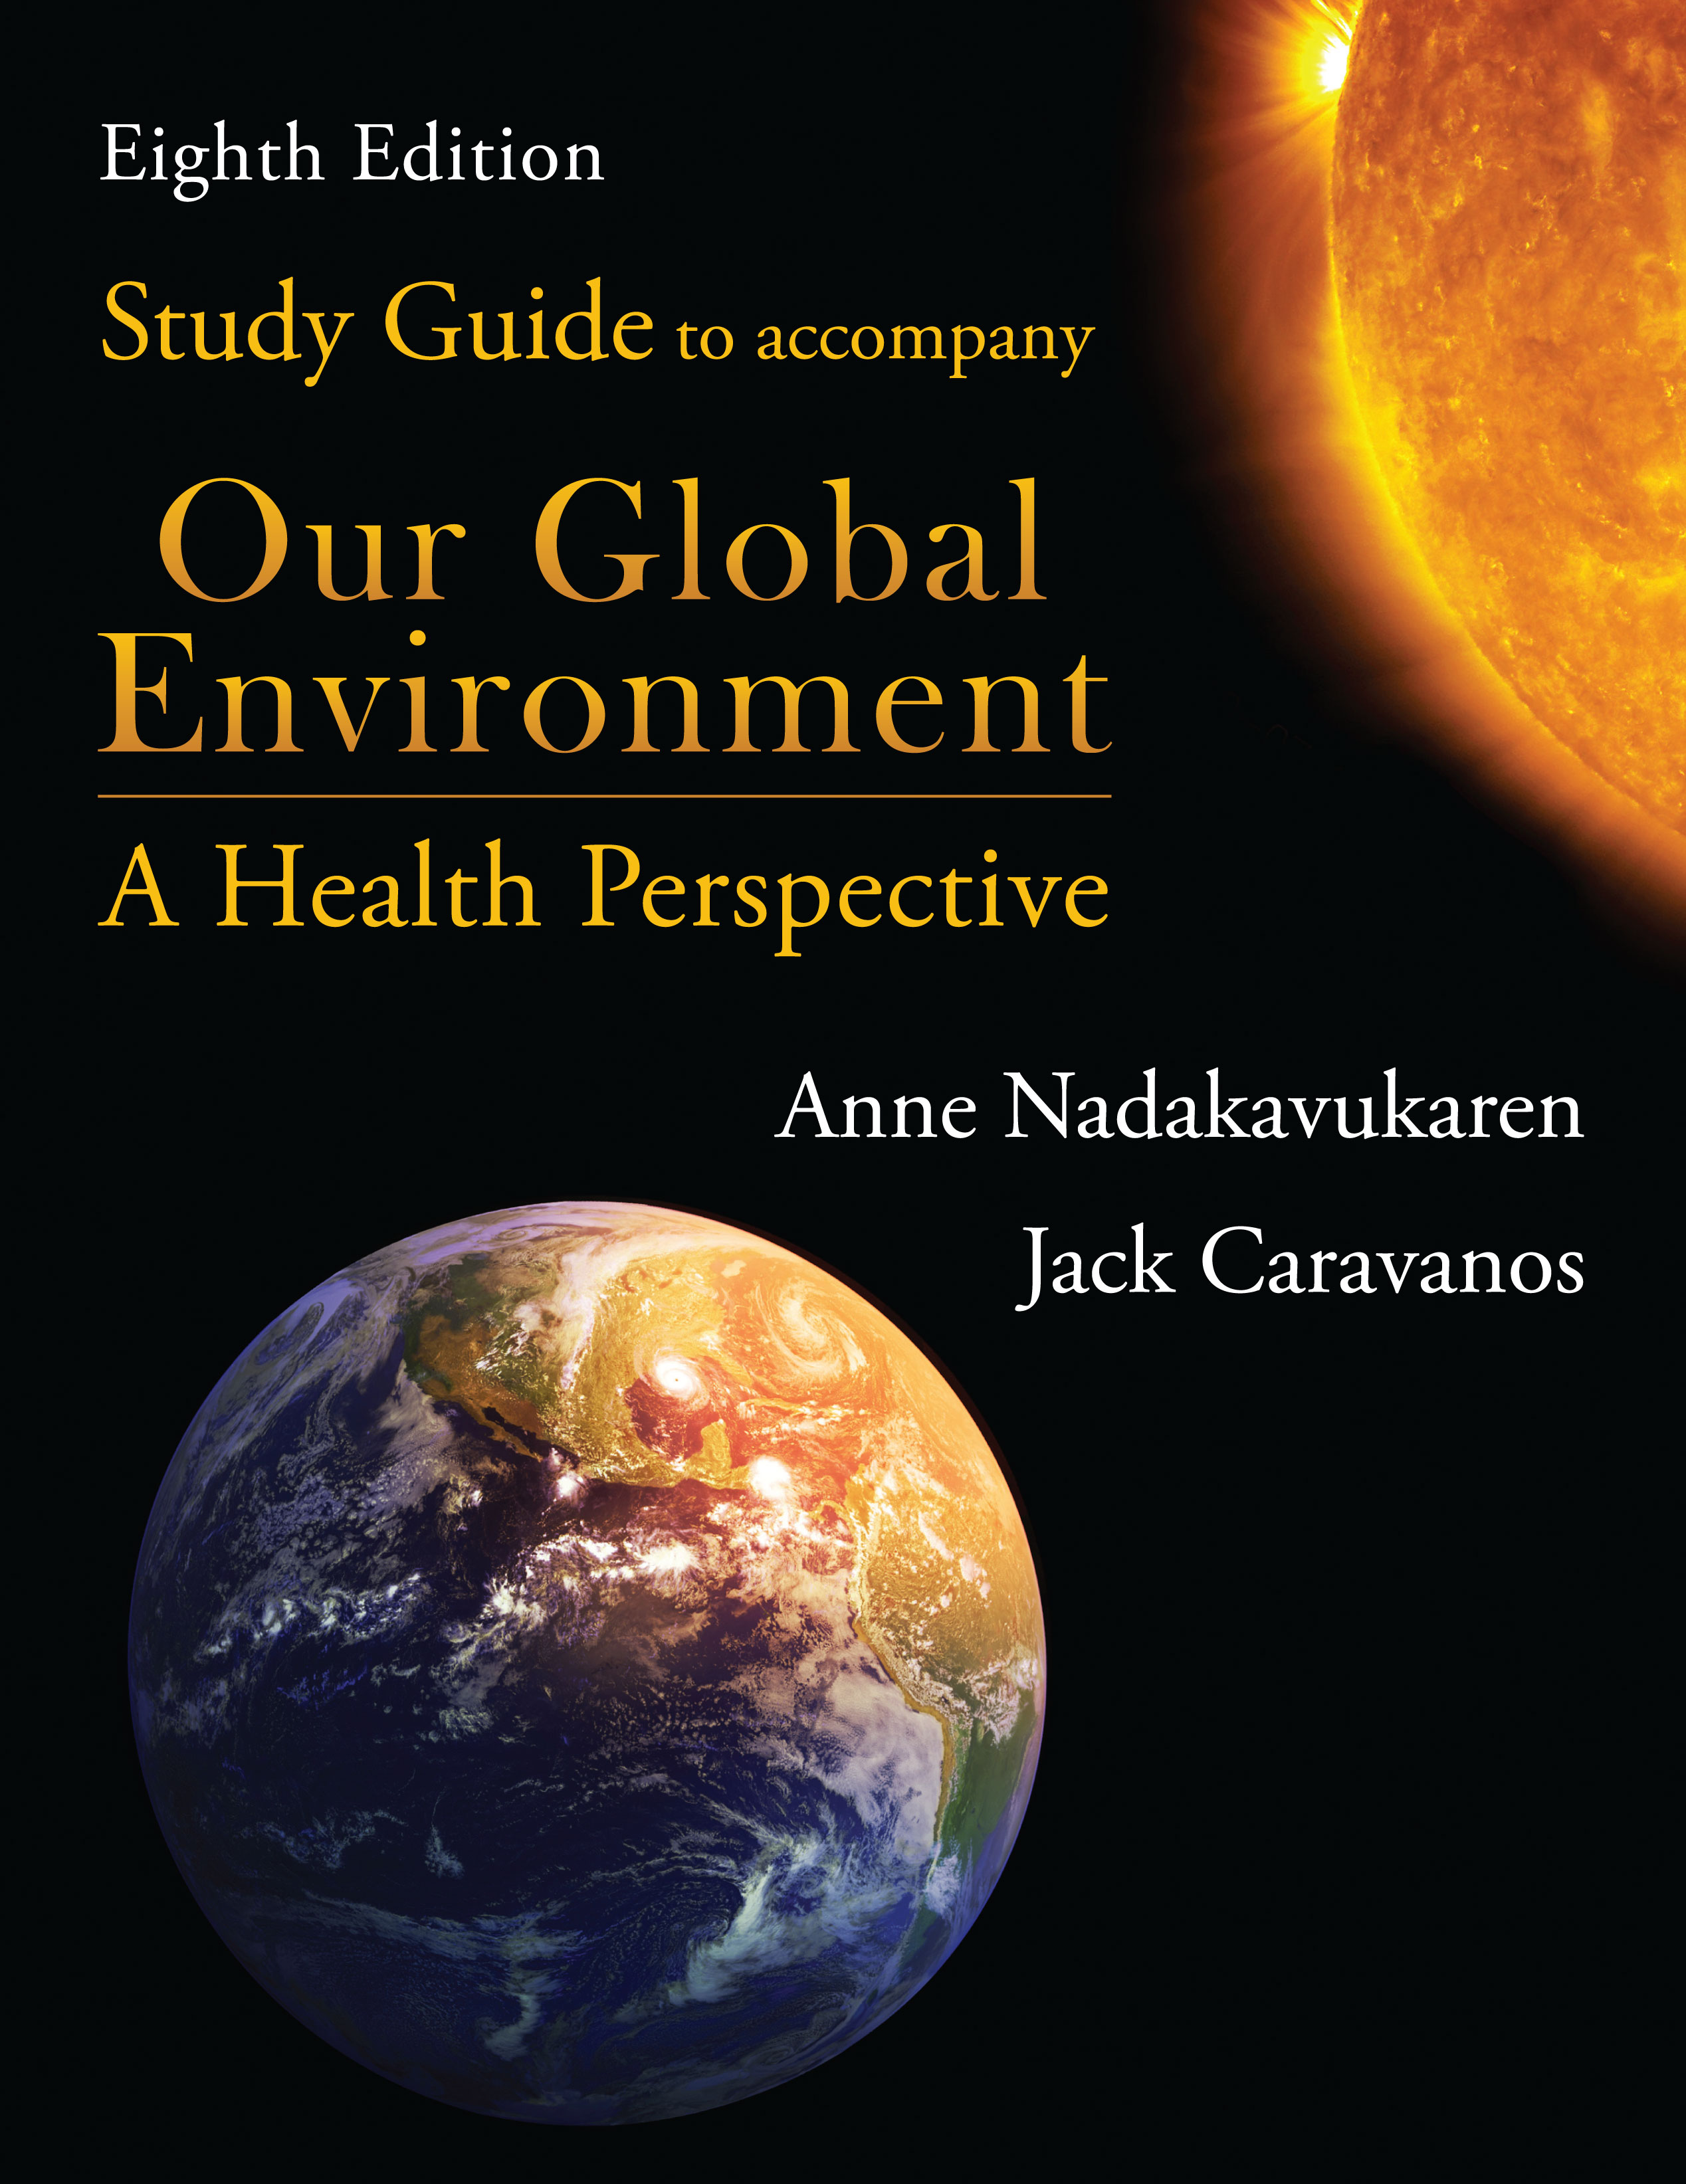 Study Guide to Accompany <i>Our Global Environment</i>: A Health Perspective, Eighth Edition by Anne  Nadakavukaren, Jack  Caravanos